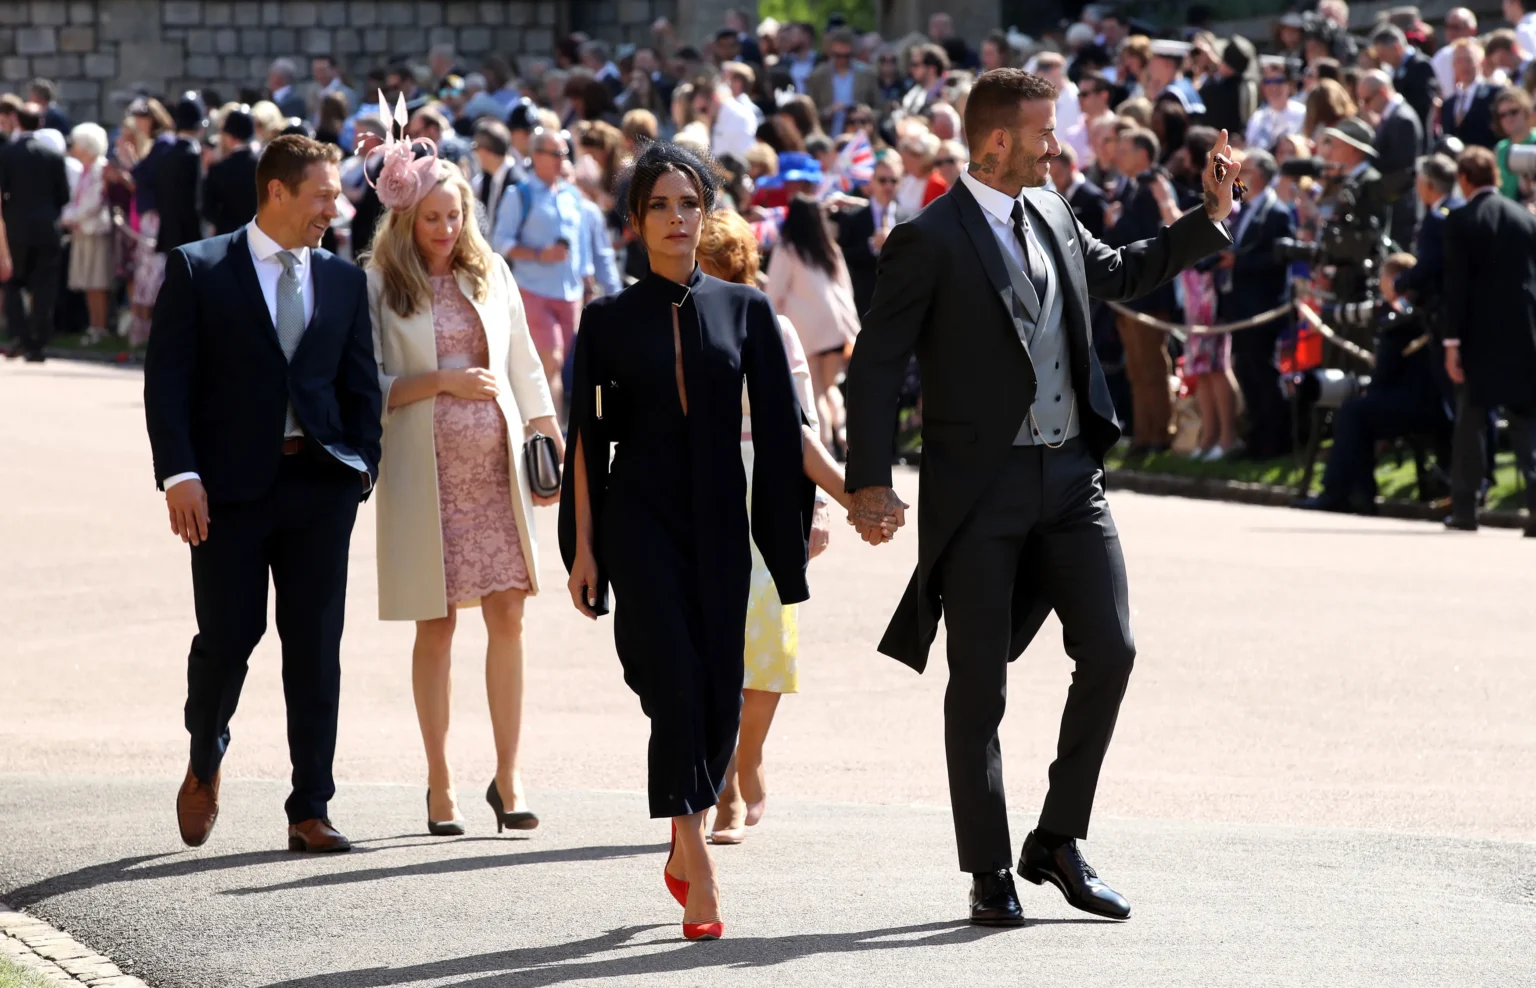 david-beckham-victoria-beckham-may-receive-royal-titles-amid-feud-with-prince-harry-meghan-markle